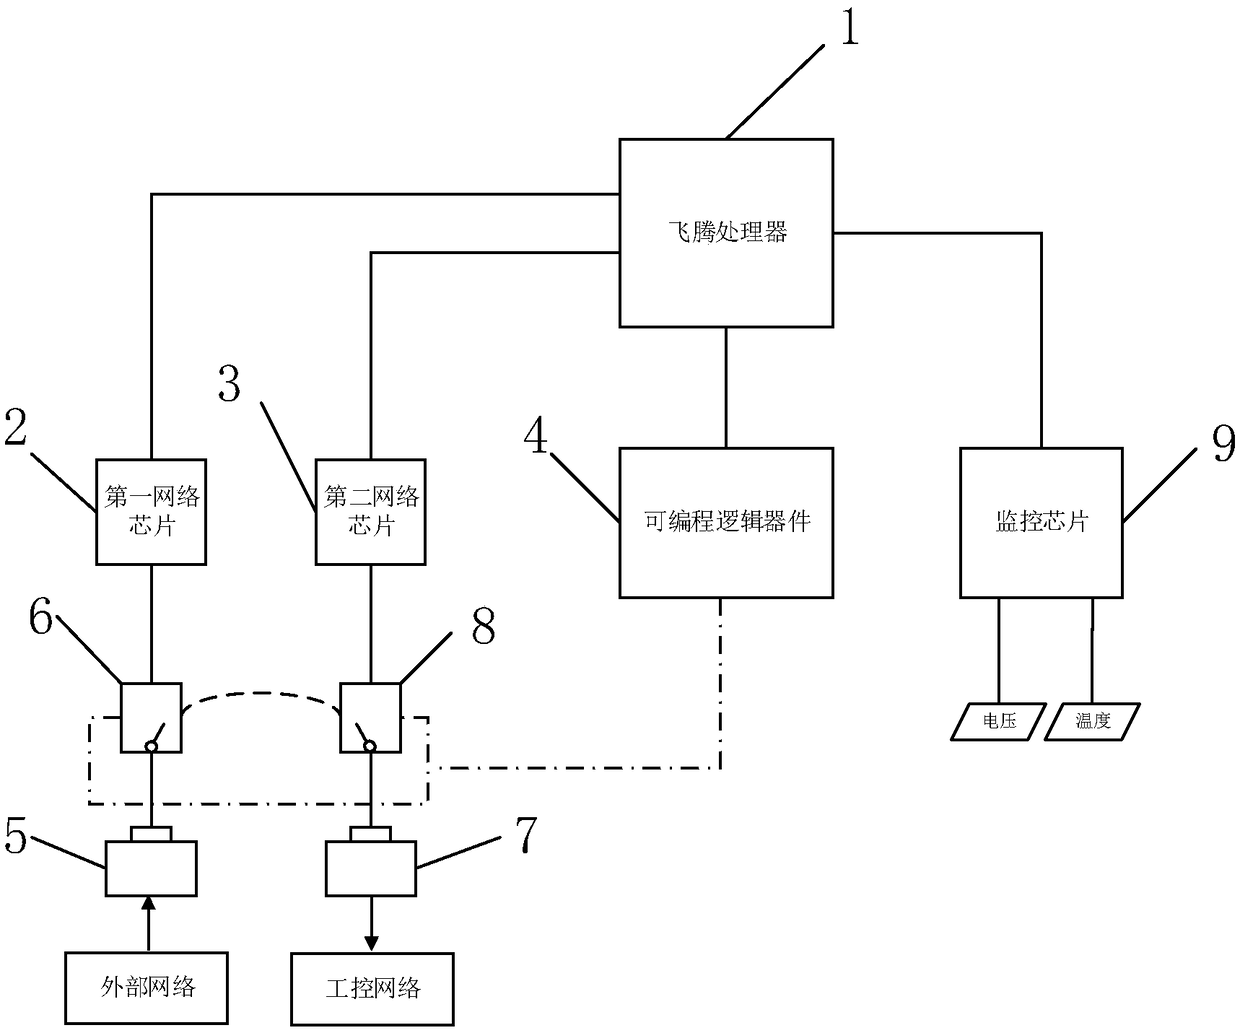 Network communication device based on Feiteng processor